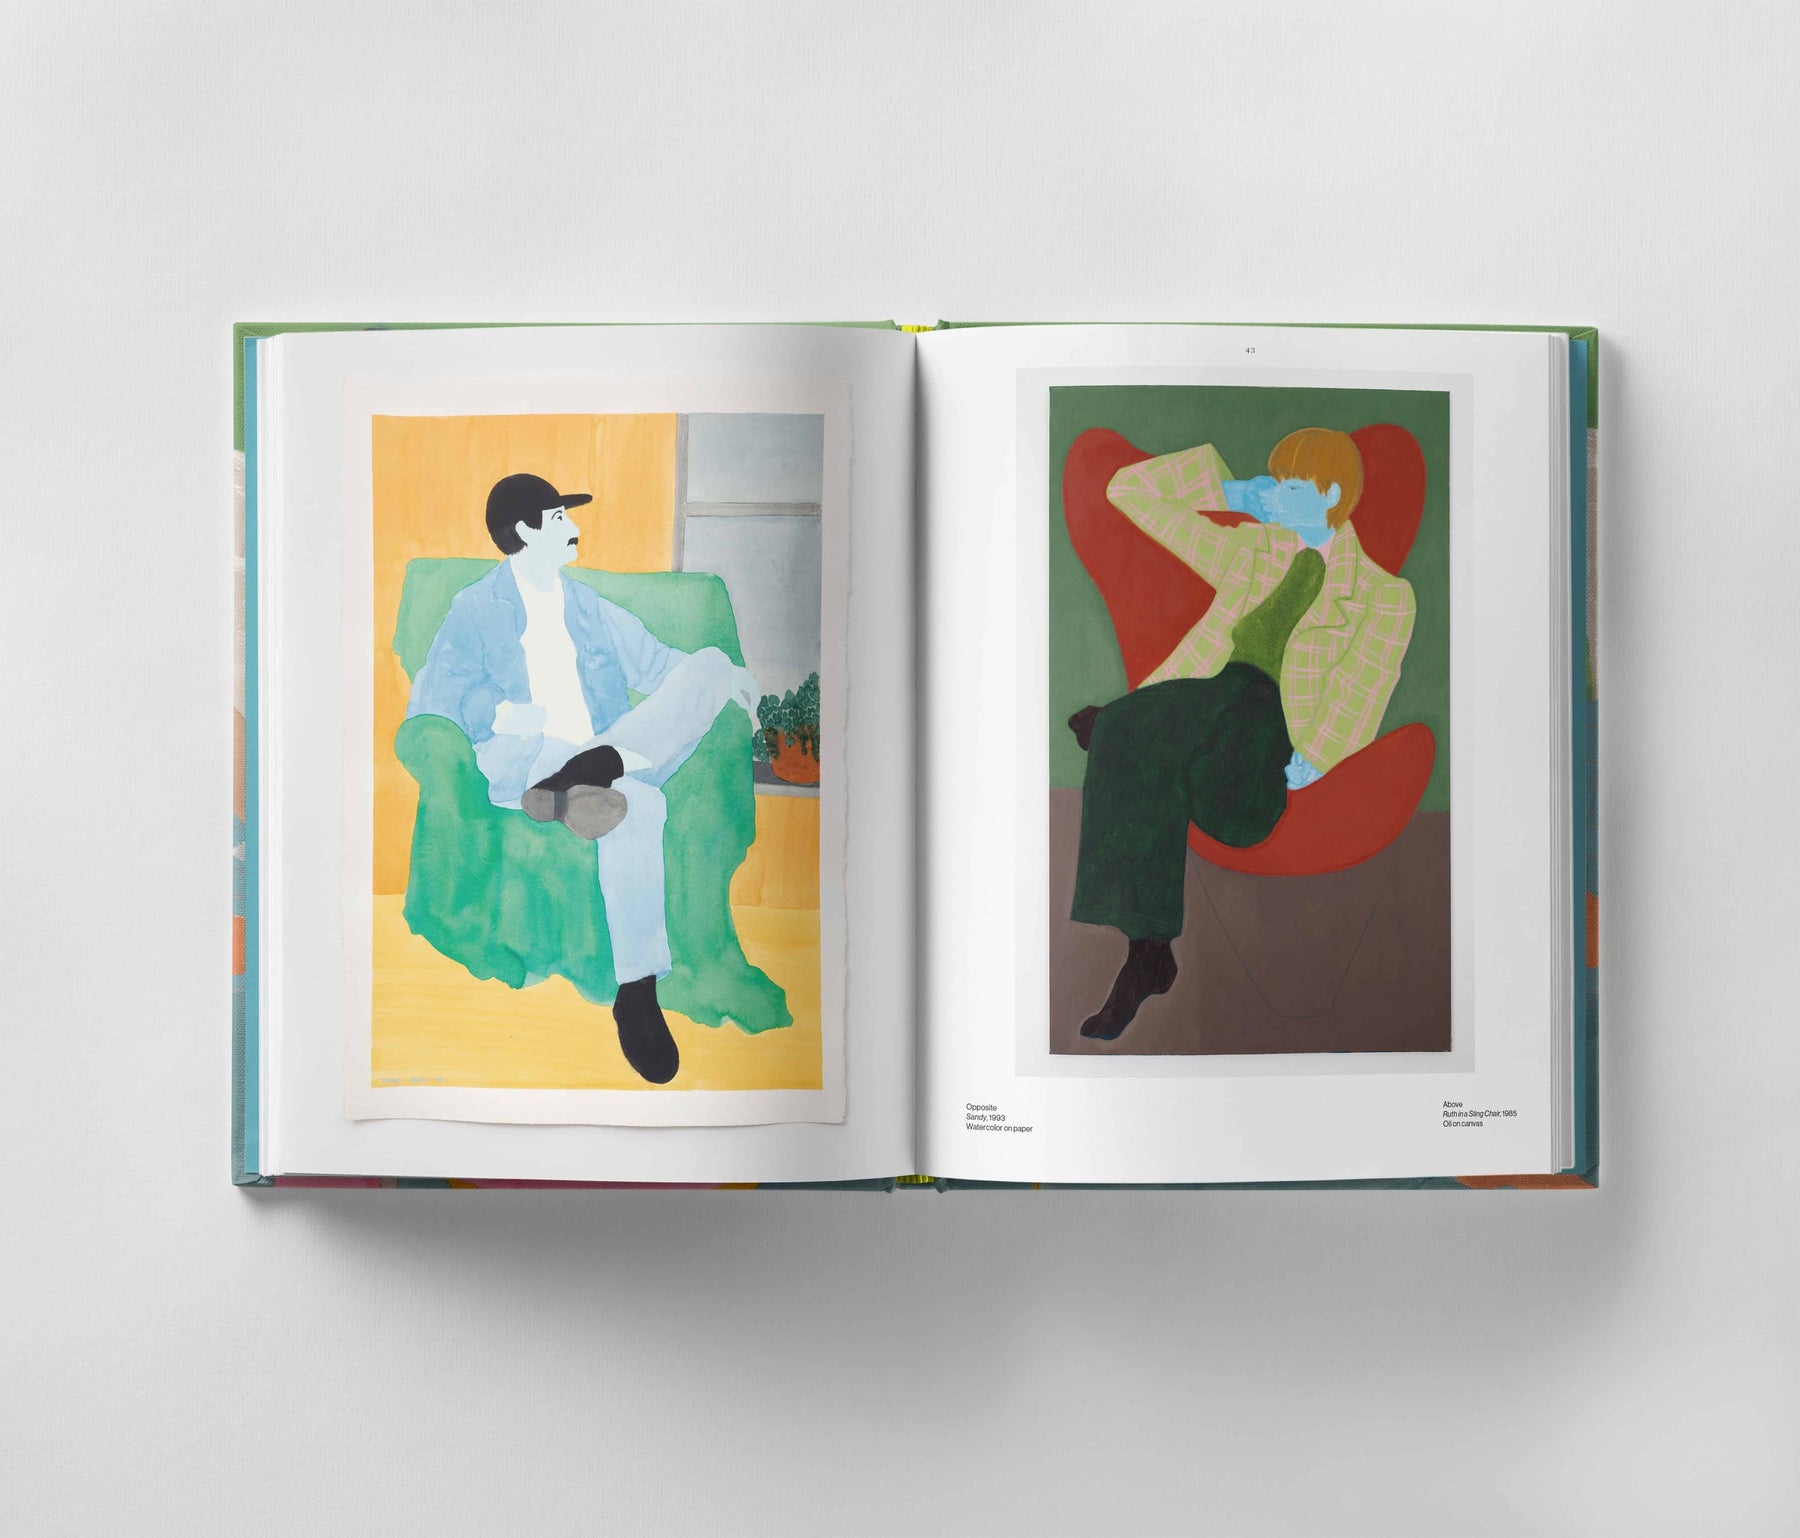 An open book displaying two illustrated pages: one showcases a person in a white outfit sitting on a green chair, capturing emotional depth, while the other reveals a person in a plaid jacket and green shirt sitting on a red chair, reminiscent of the evocative style seen in *March Avery: A Life in Color* by Black Dog Online.